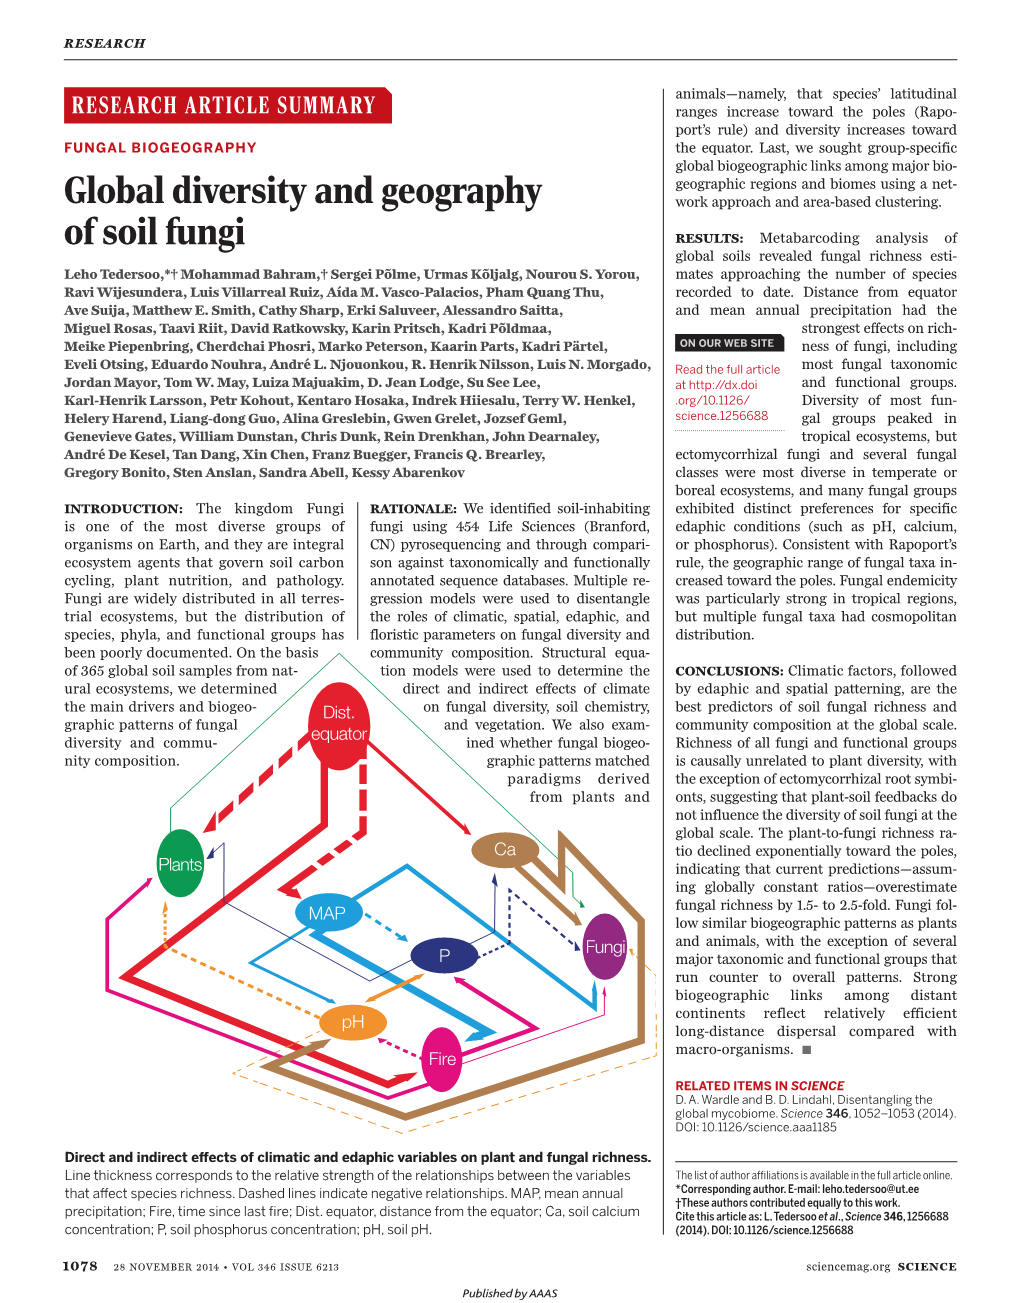 Global Diversity and Geography of Soil Fungi